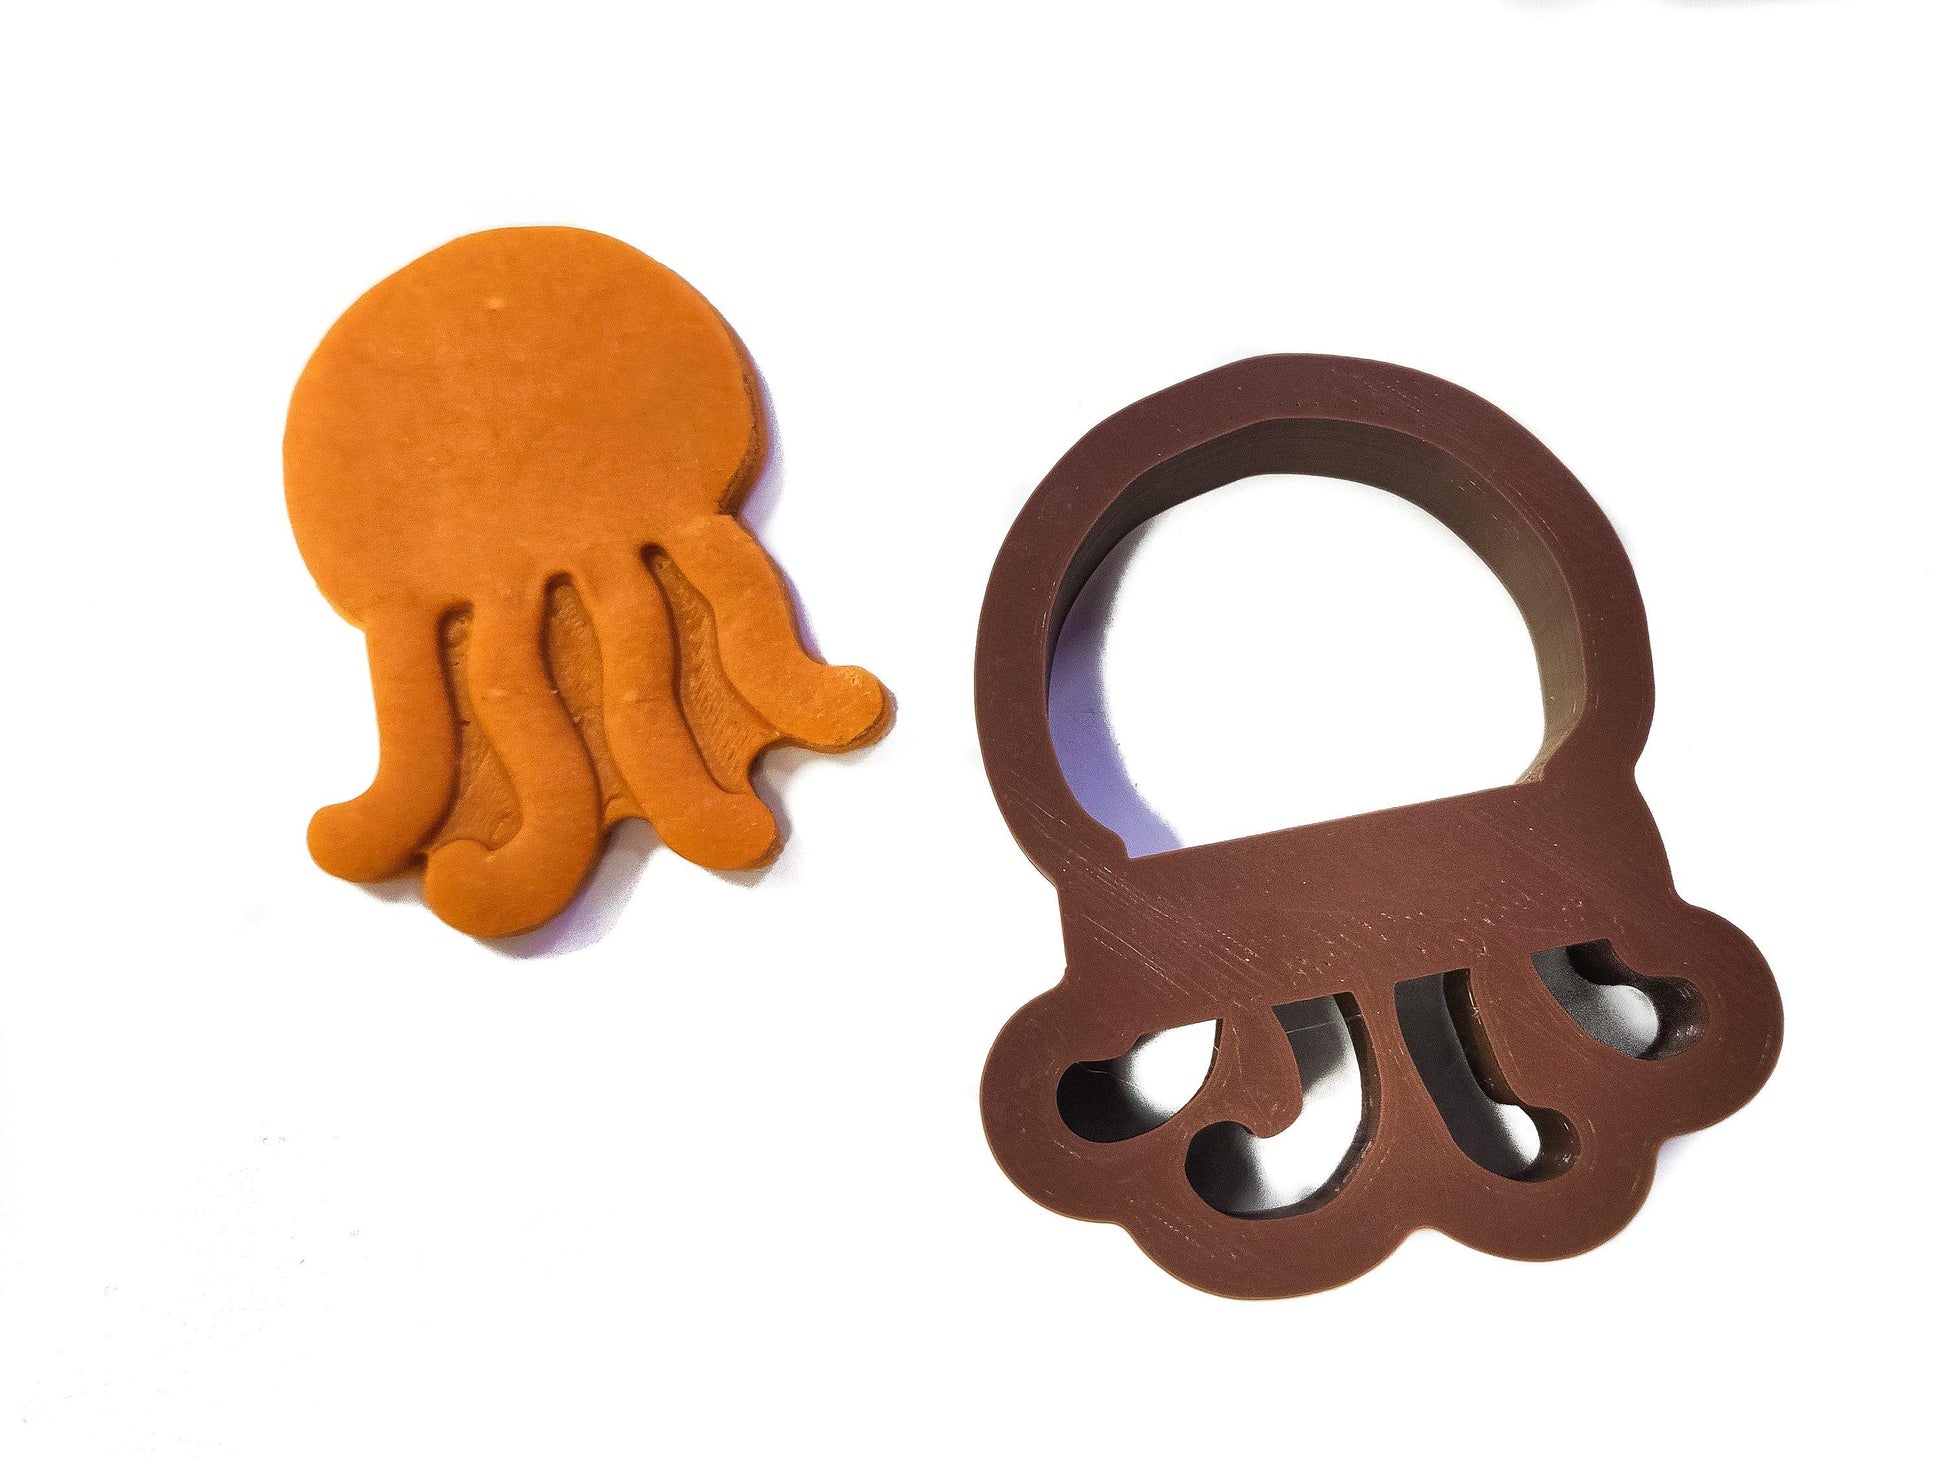 Jelly fish cookie cutter. Mermaid party cookie stamp decoration. Jellyfish beach party cookies. Under the sea birthday party decor cookies - Malta Cookie Cutters